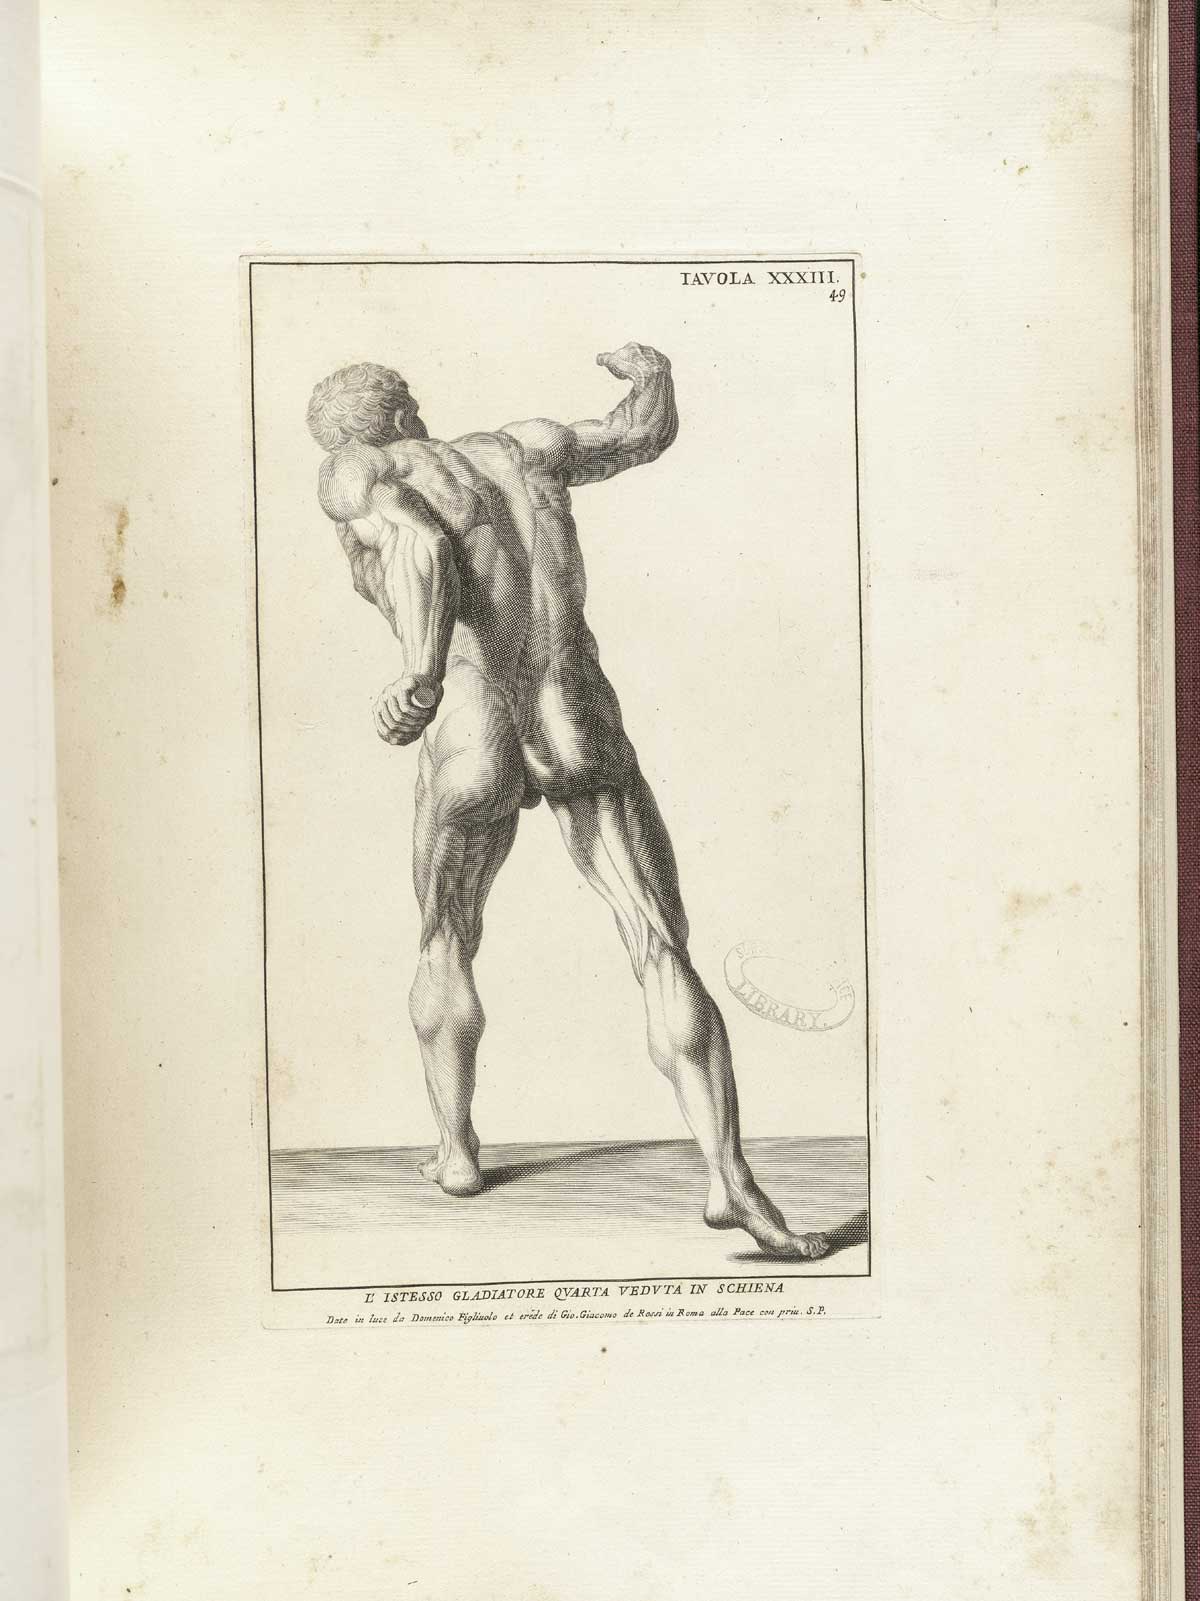 Engraving of the statue the Borghese Gladiator, a nude male figure viewed from behind, lunging forward with his right hand raised as if with a sword to fight an opponent on horseback; from Bernardino Genga’s Anatomia per uso et intelligenza del disegno, NLM Call no.: WZ 250 G329an 1691.